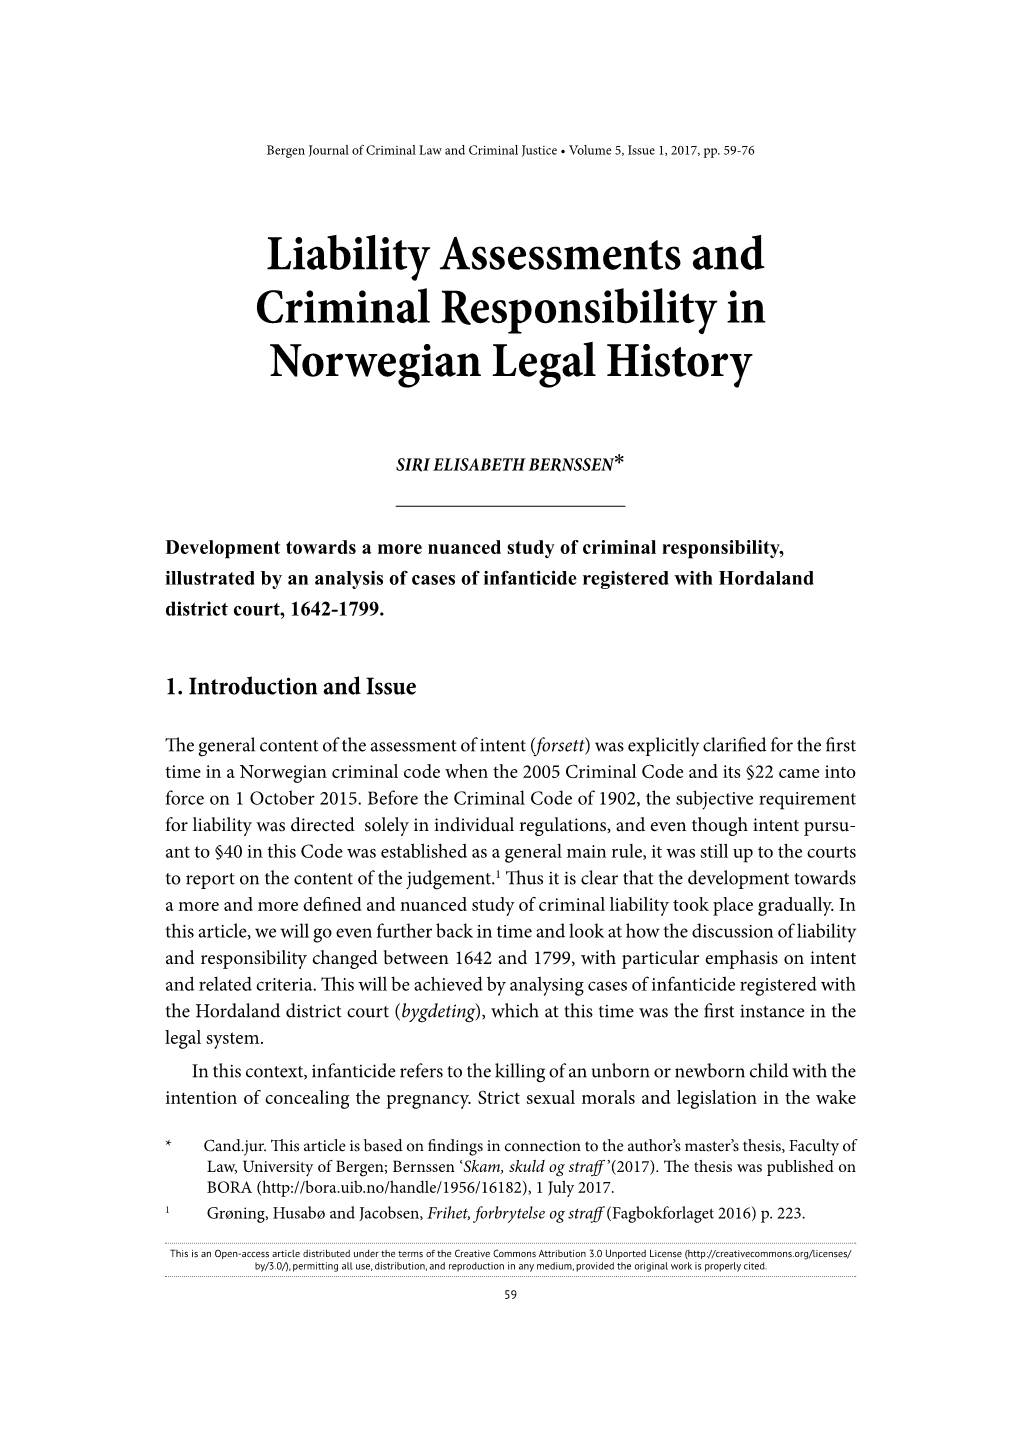 Liability Assessments and Criminal Responsibility in Norwegian Legal History